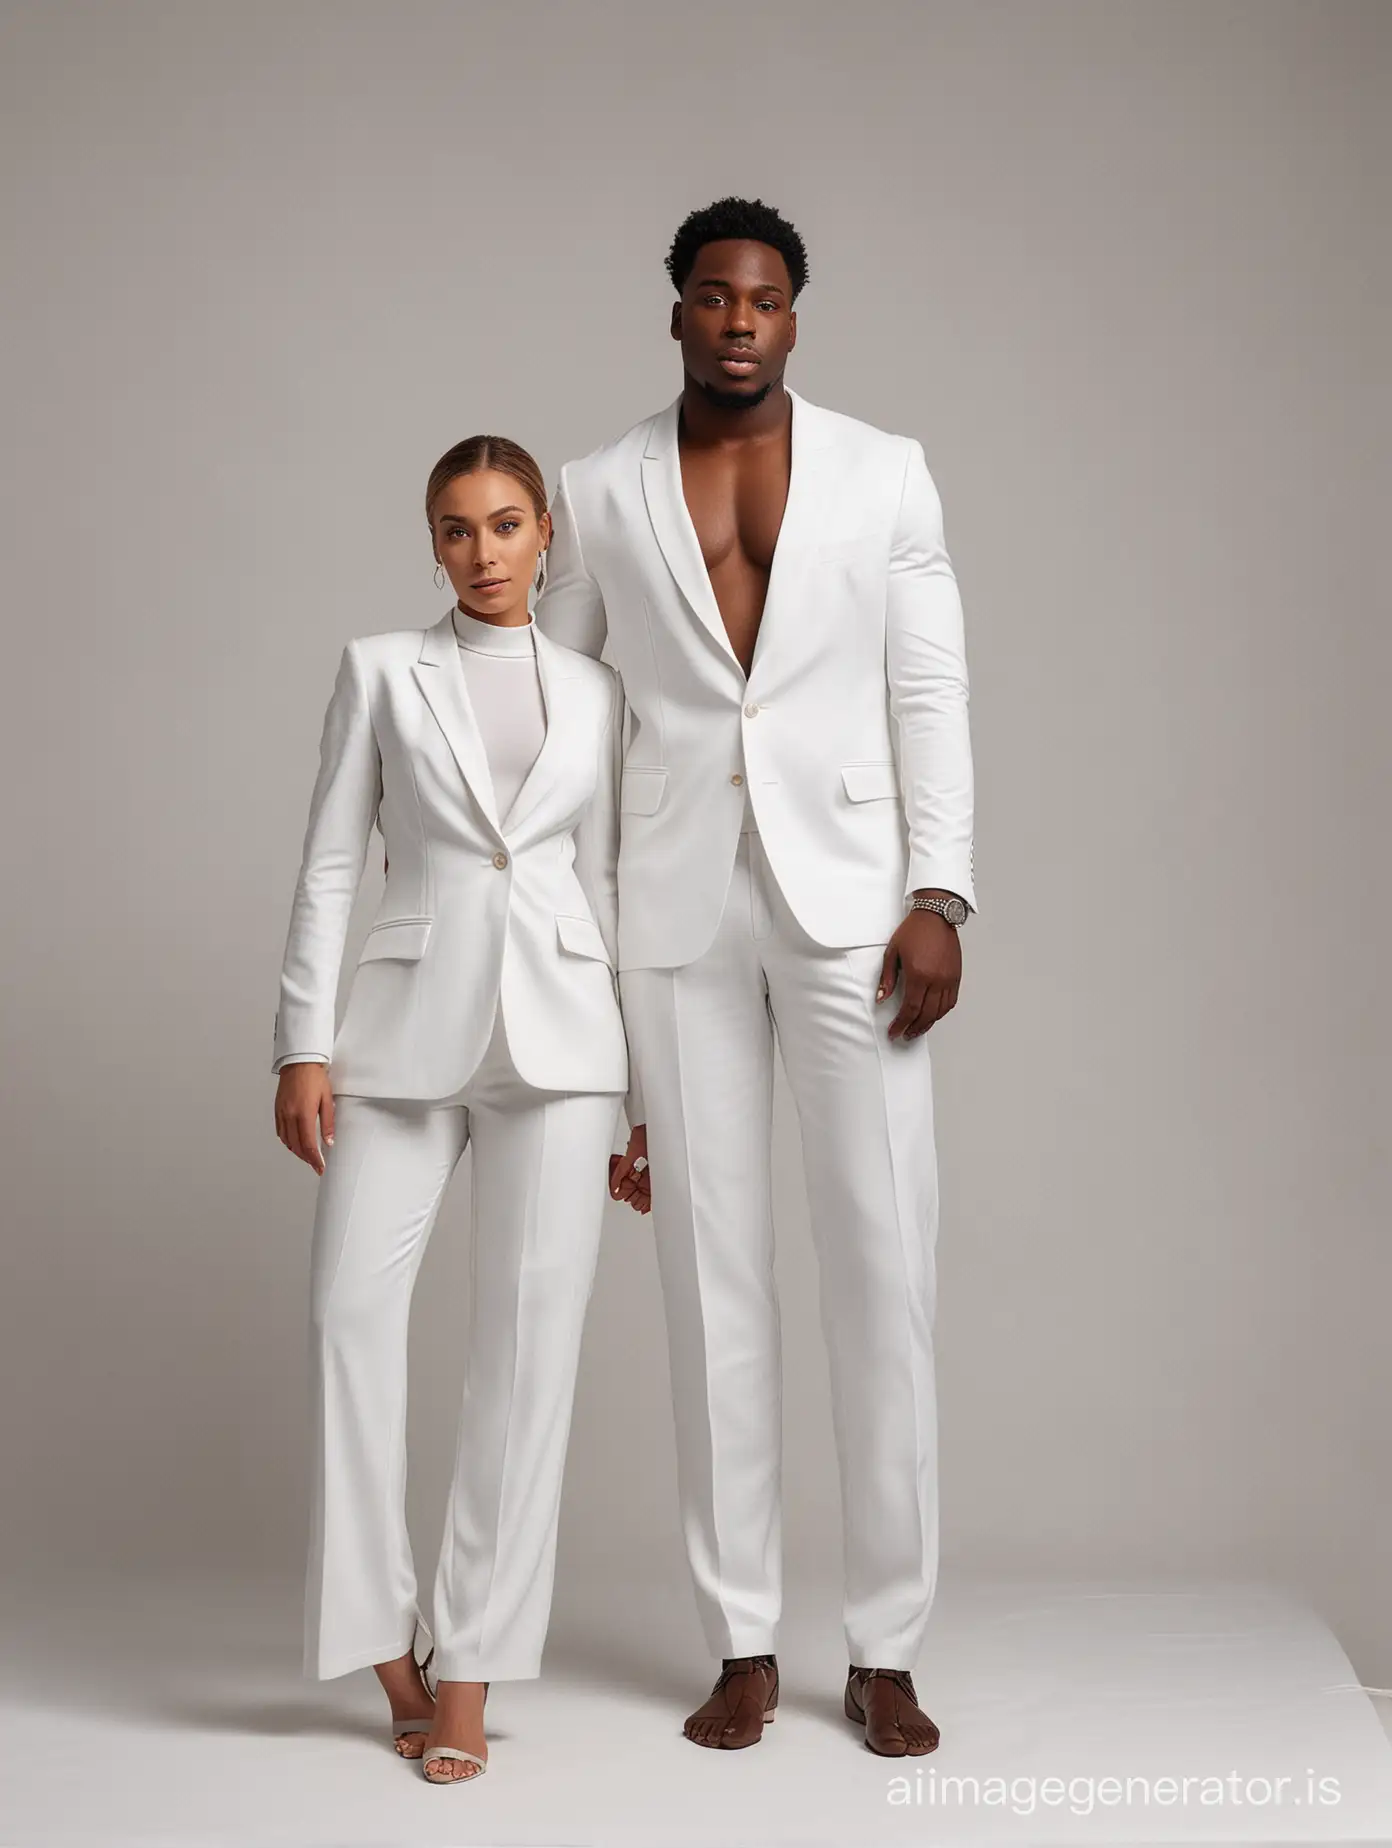 black people couple man+woman wearing white suit in front standing position from head to toe